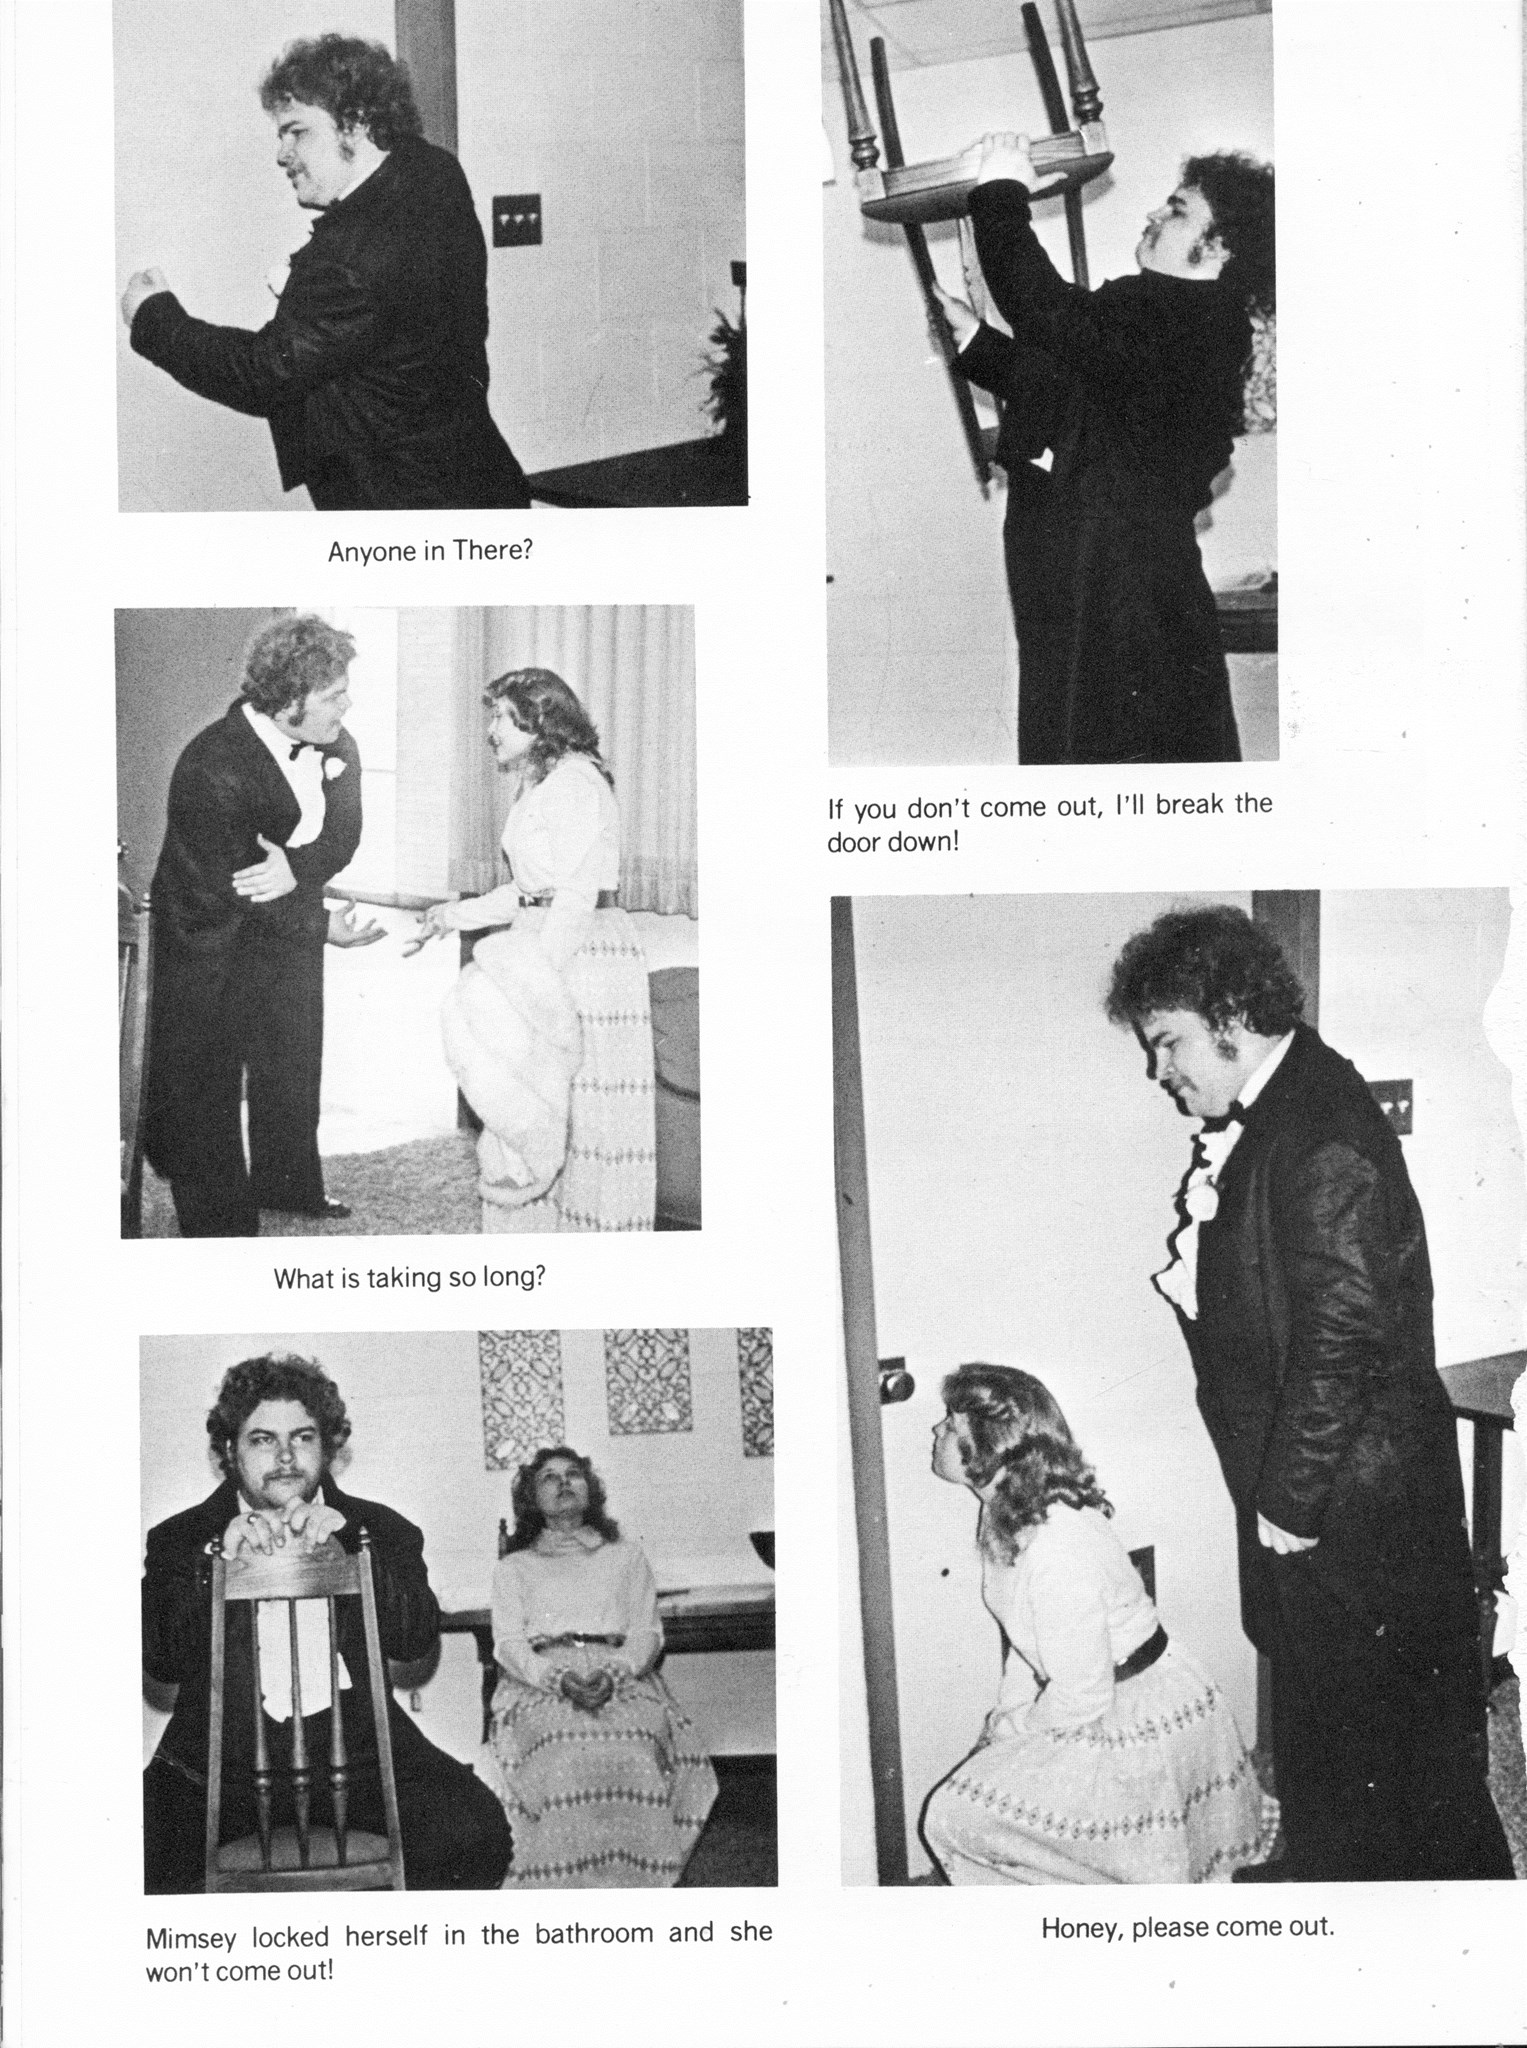 ../../../Images/Large/1978/Arclight-1978-pg0096.jpg